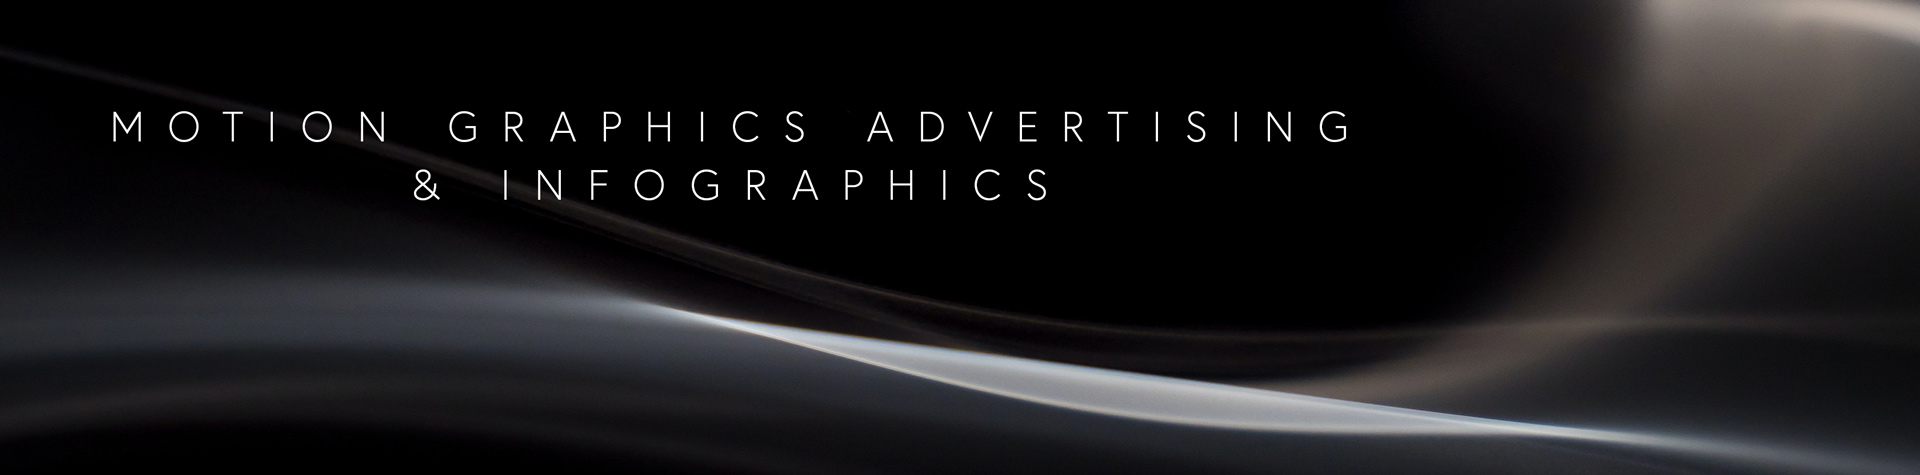 SMD-MOTION-GRAPHICS-ADVERTISING-Banner